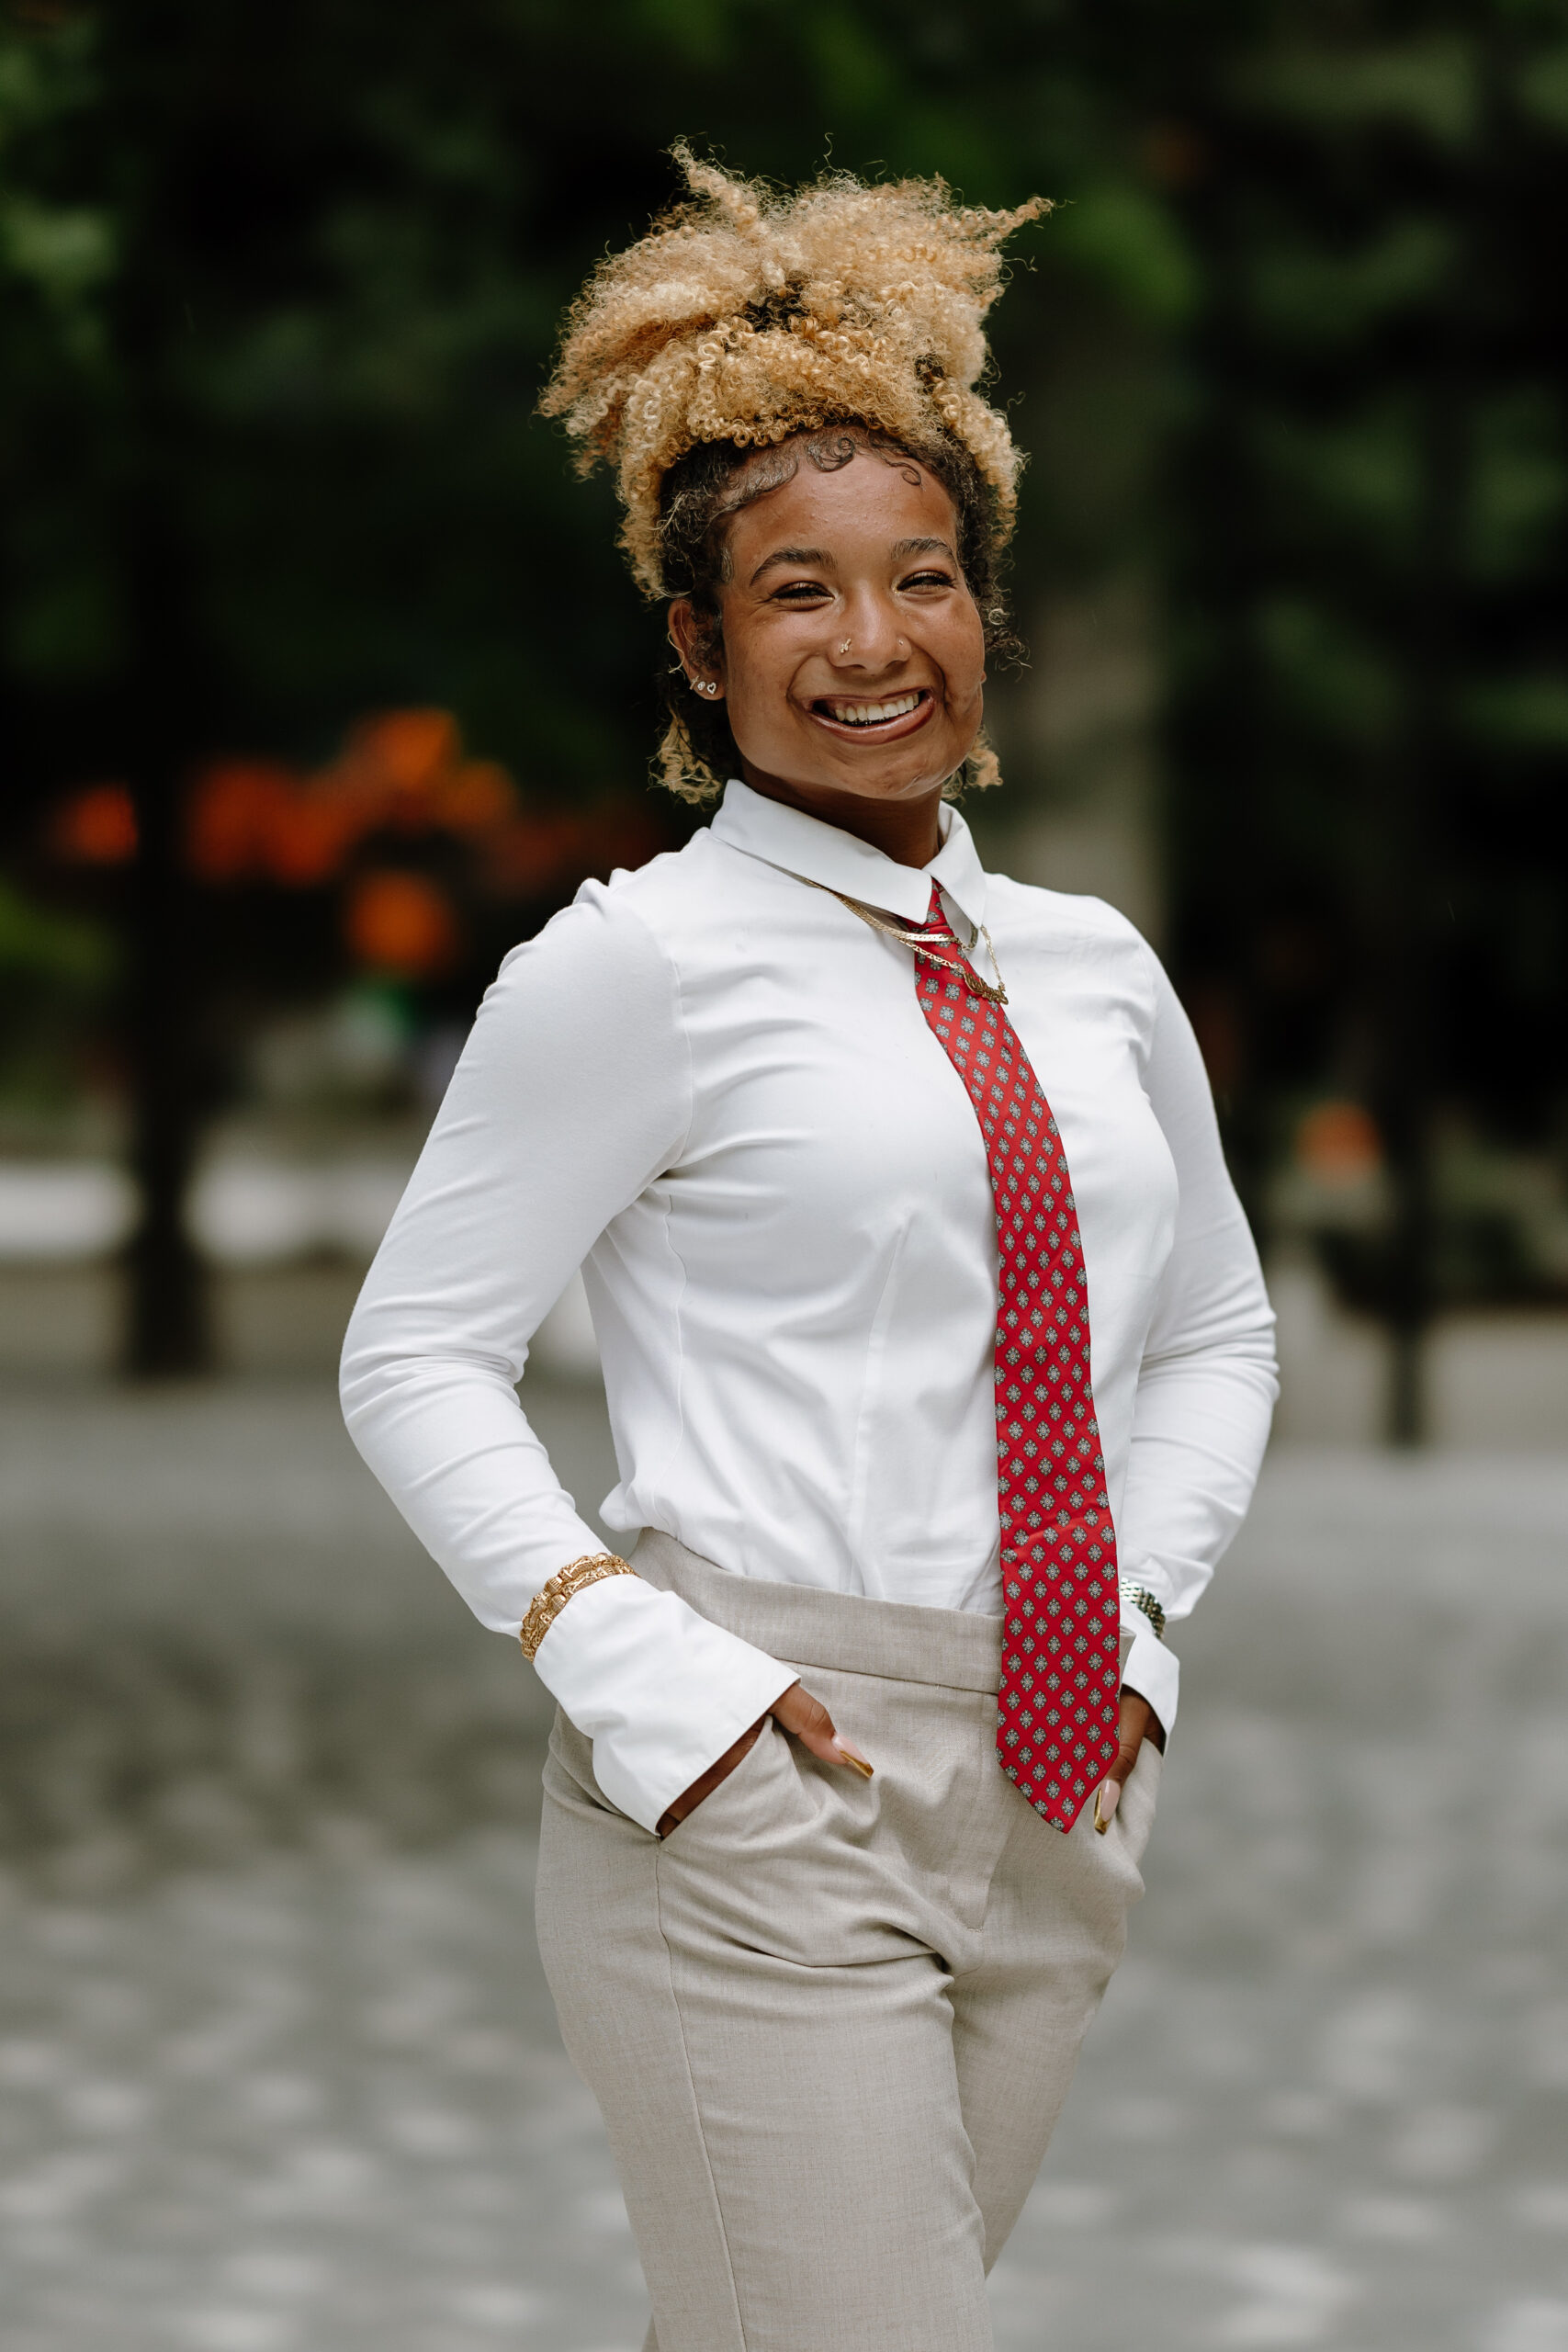 A Black female with blonde curly hair tied up smiling at the camera with her hands in her pocket. She is wearing a white long sleeved button down shirt with a red tie with white stars, gold bangles, and gray-tan pants.